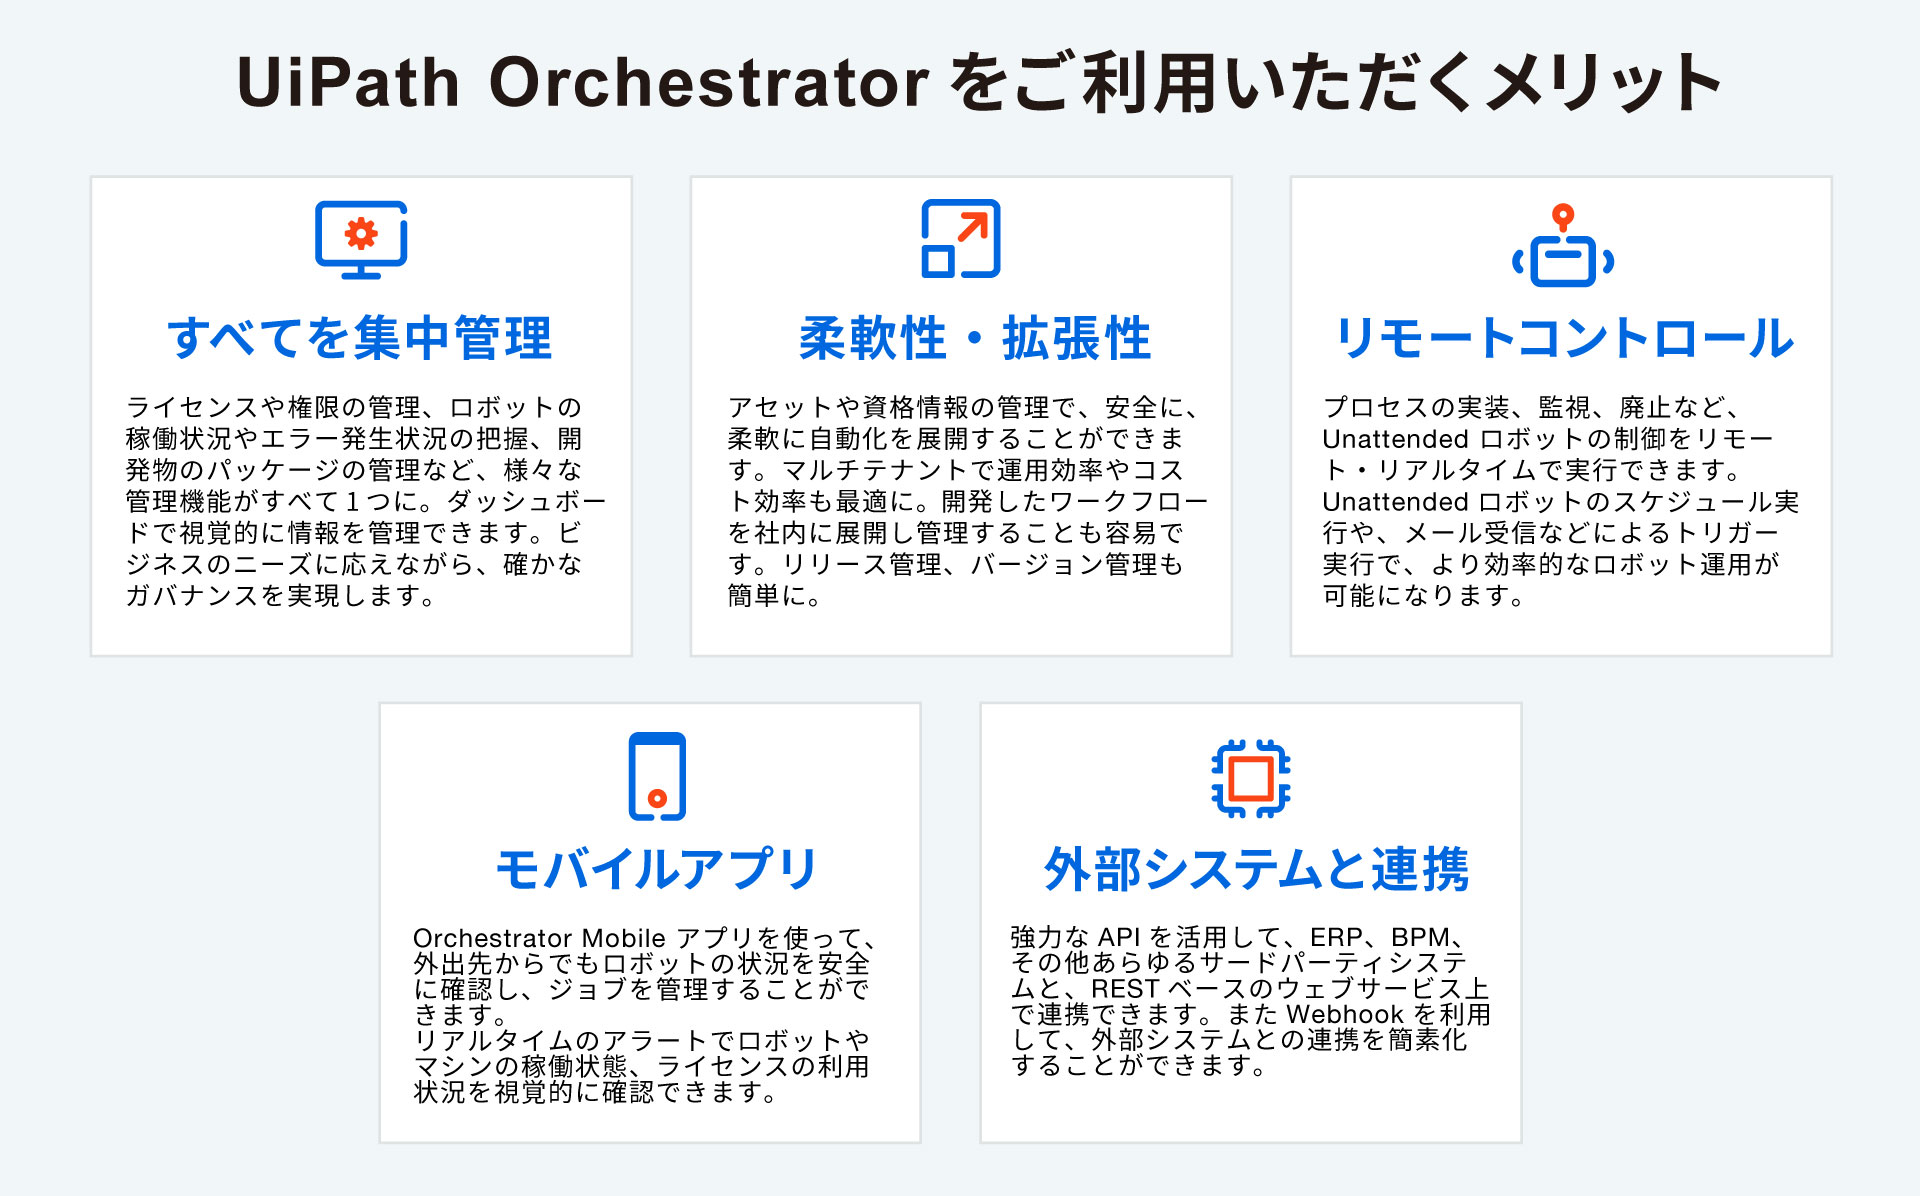 uipath-orchestrator-video-series_2